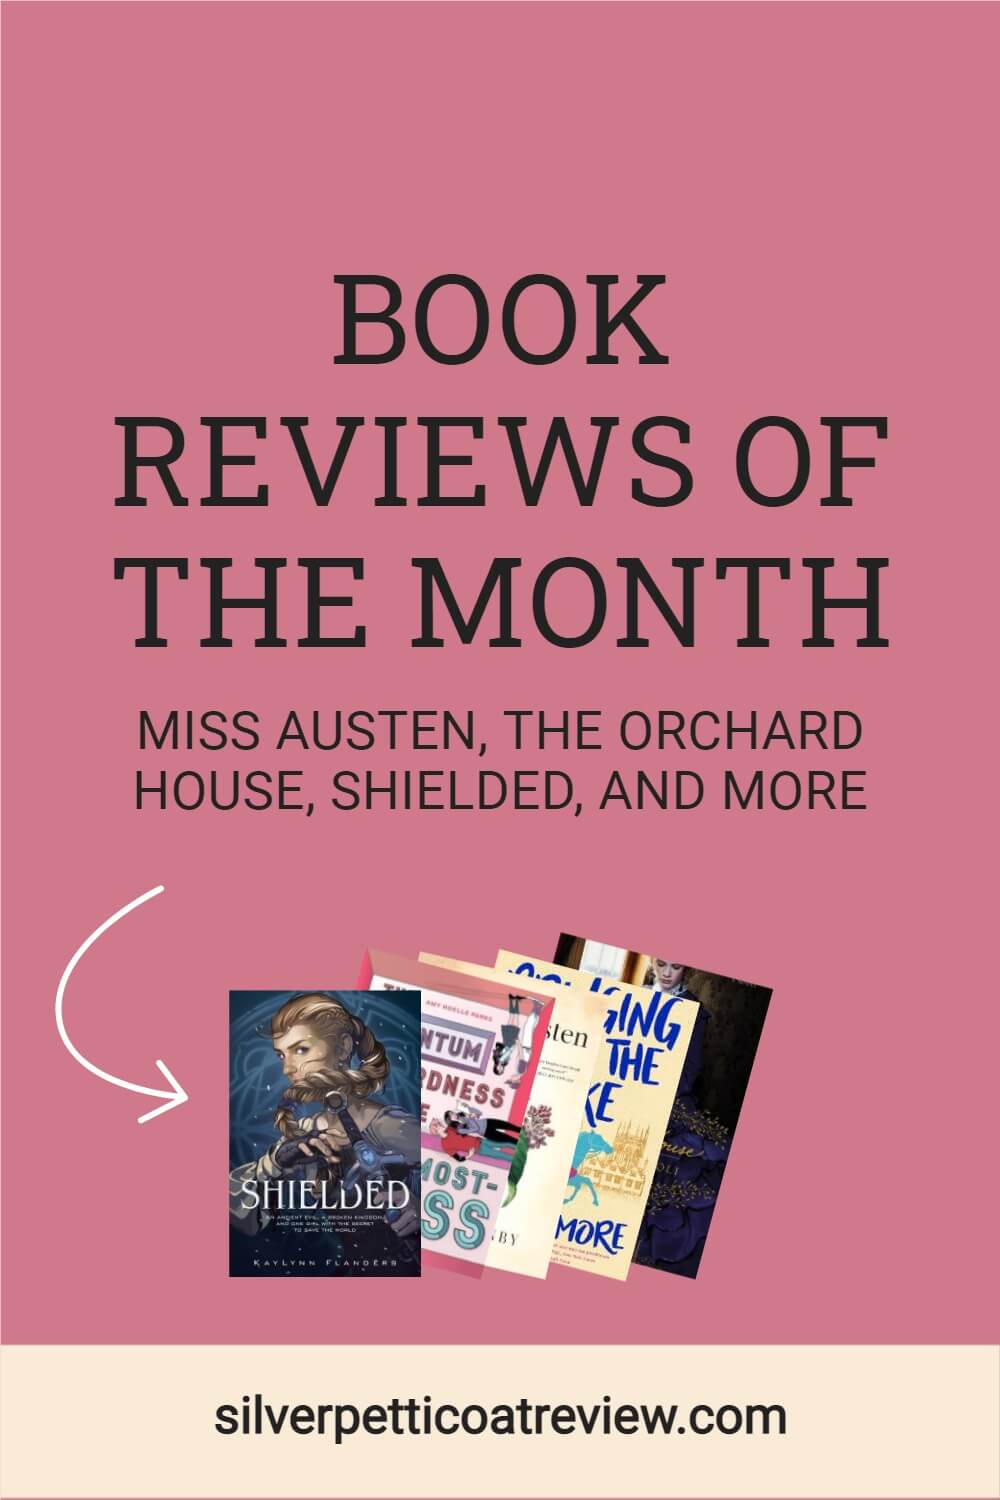 BOOK REVIEWS OF THE MONTH: MISS AUSTEN BY GILL HORNBY, THE ORCHARD HOUSE, SHIELDED, AND MORE; Pinterest image